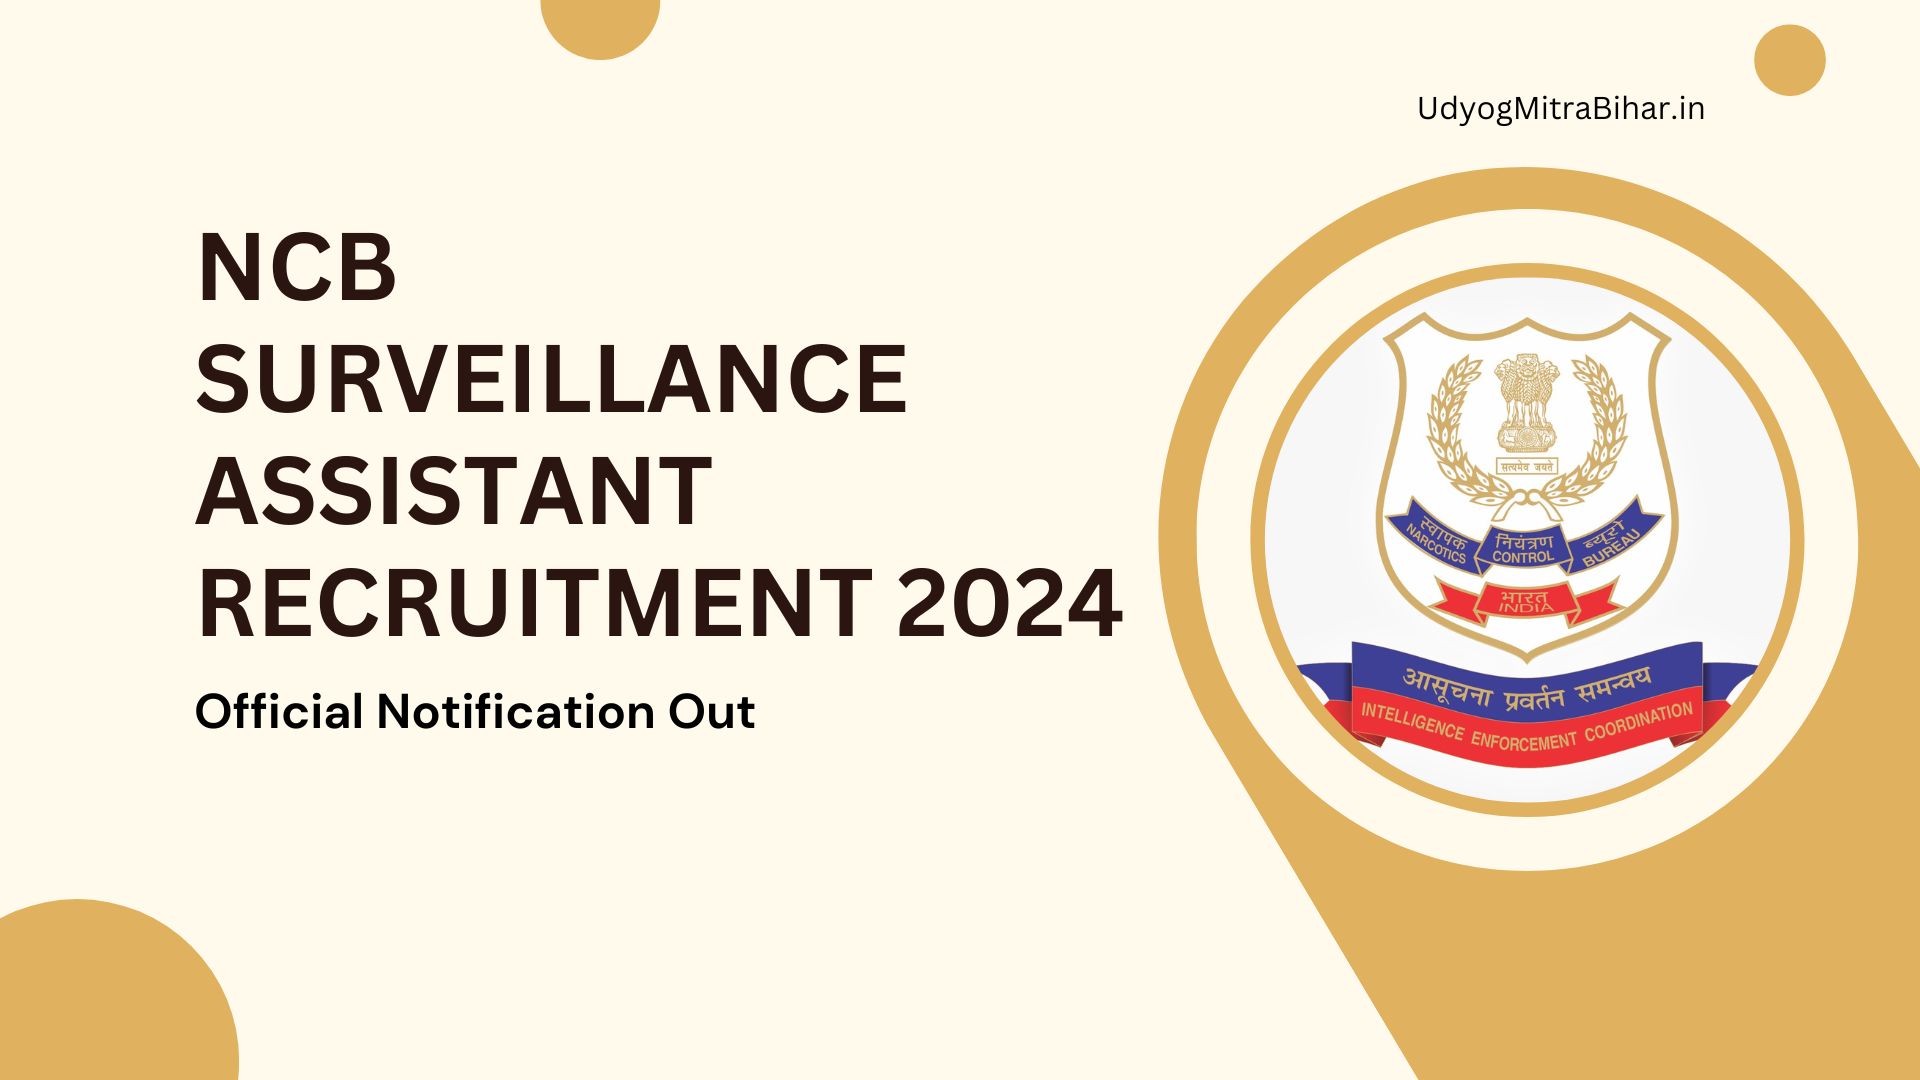 NCB Surveillance Assistant Recruitment 2024 for 18 Posts, Apply Now, Eligibility Criteria, Salary